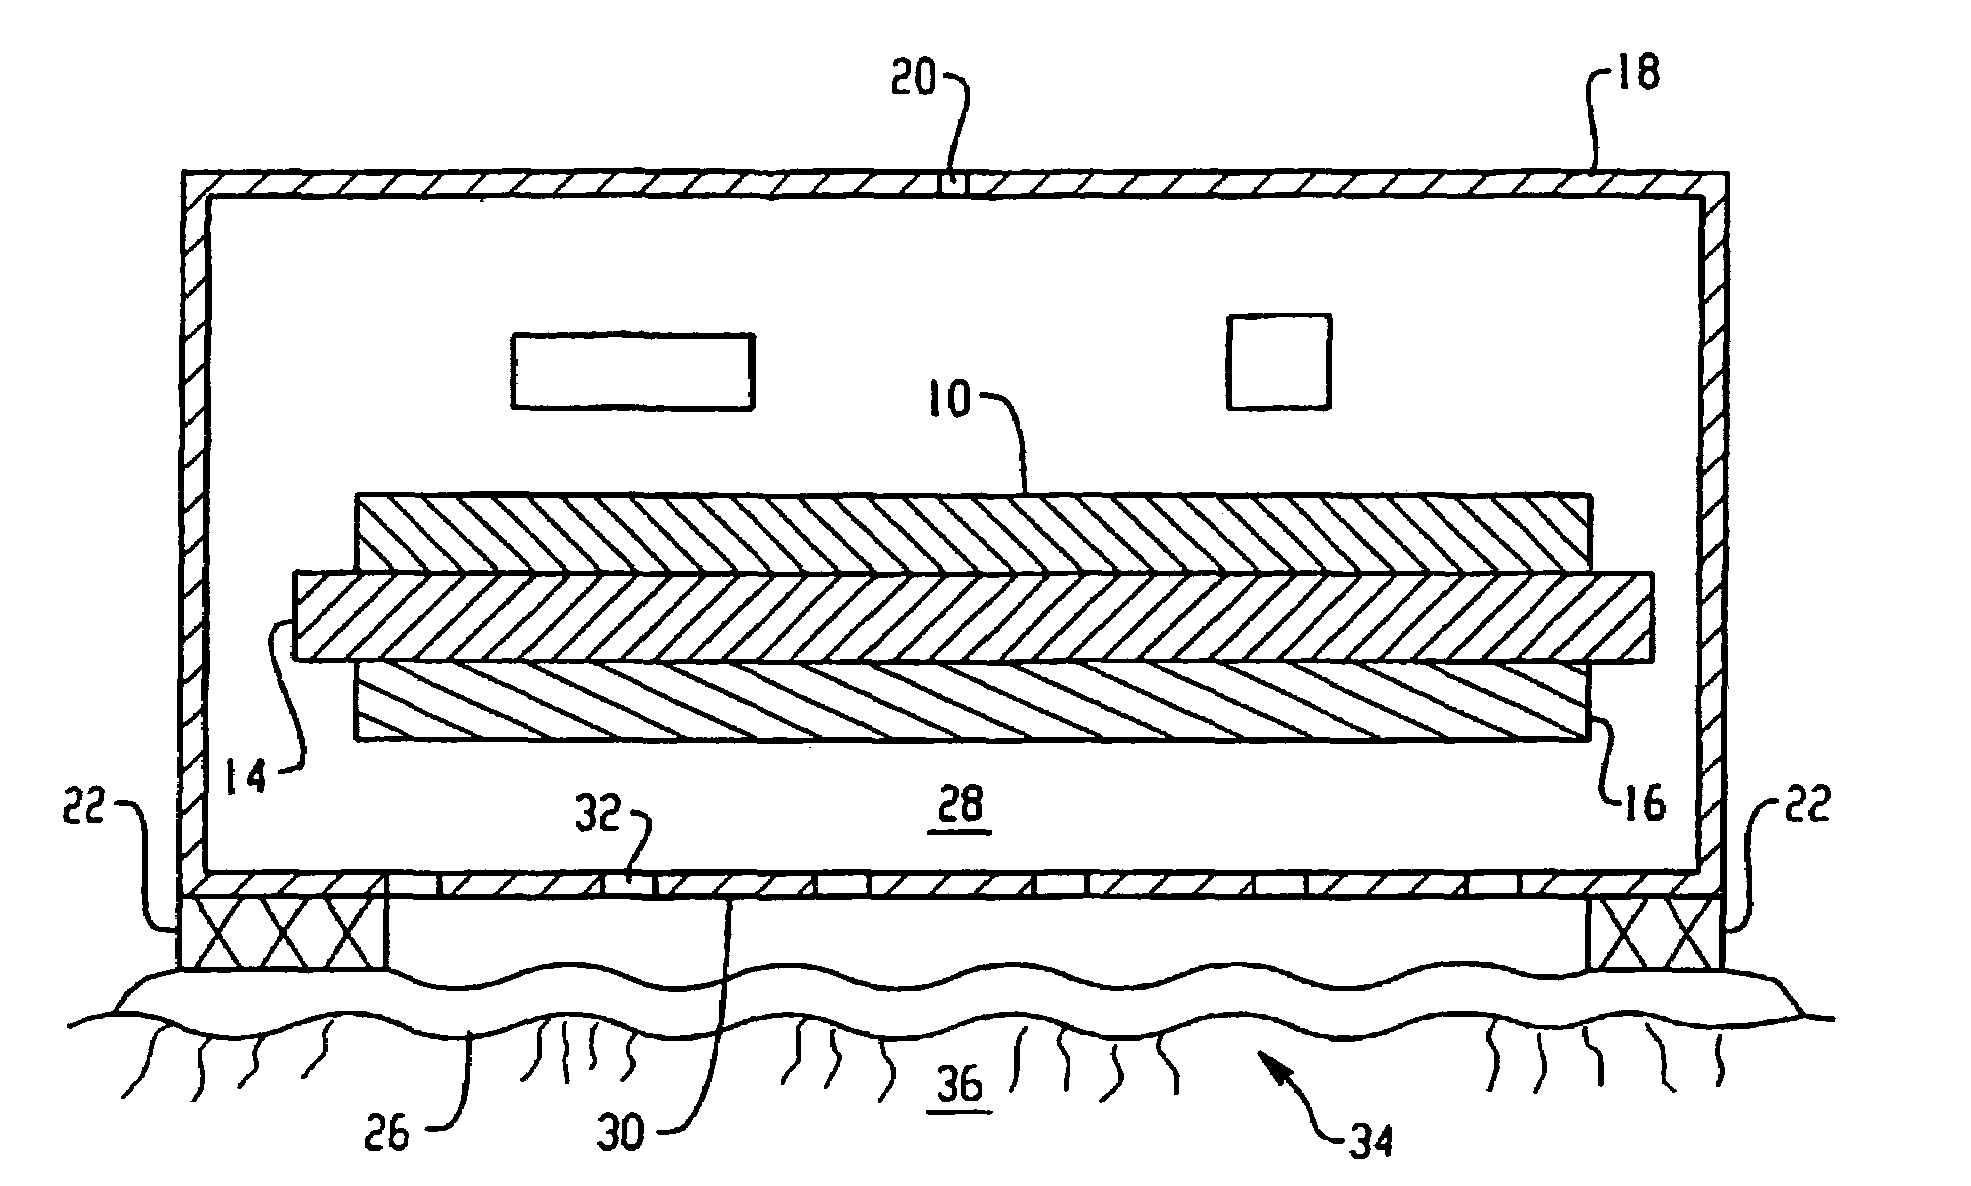 Oxygen producing device for woundcare